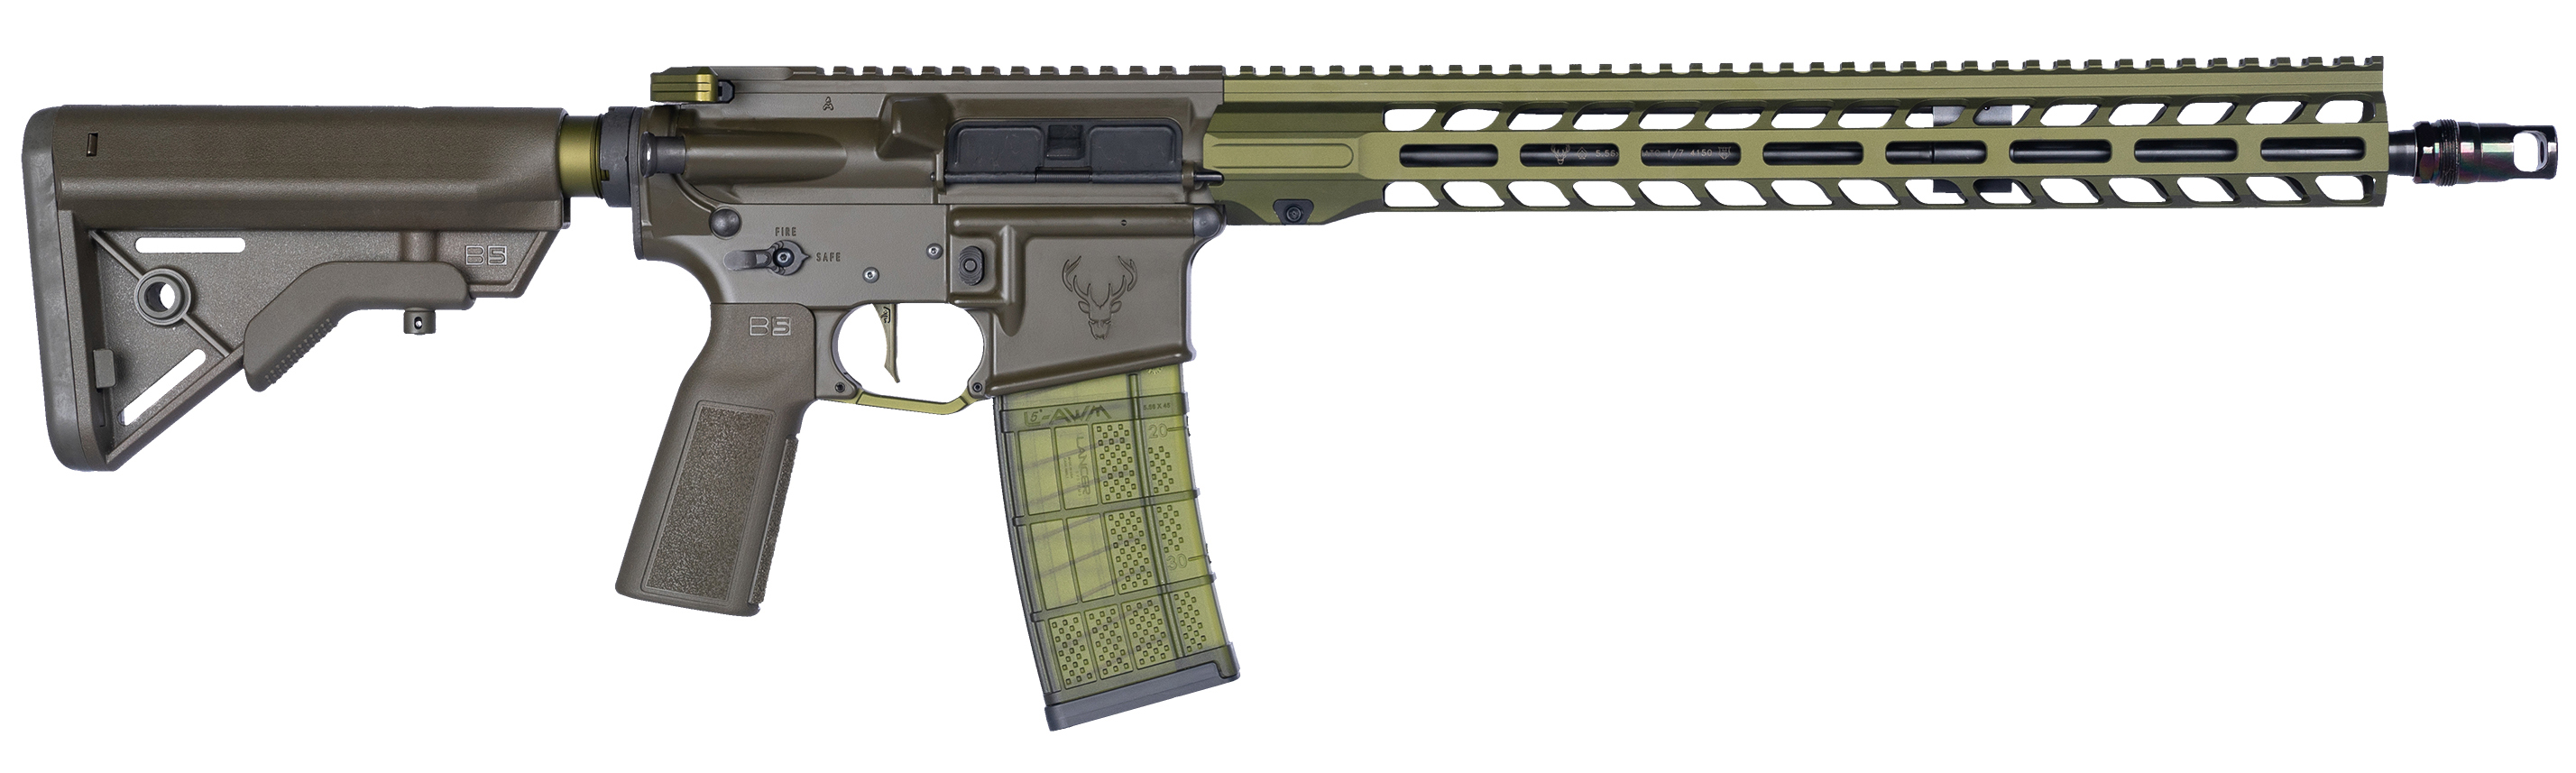 STAG 15 PROJECT SPCTRM 5.56 16